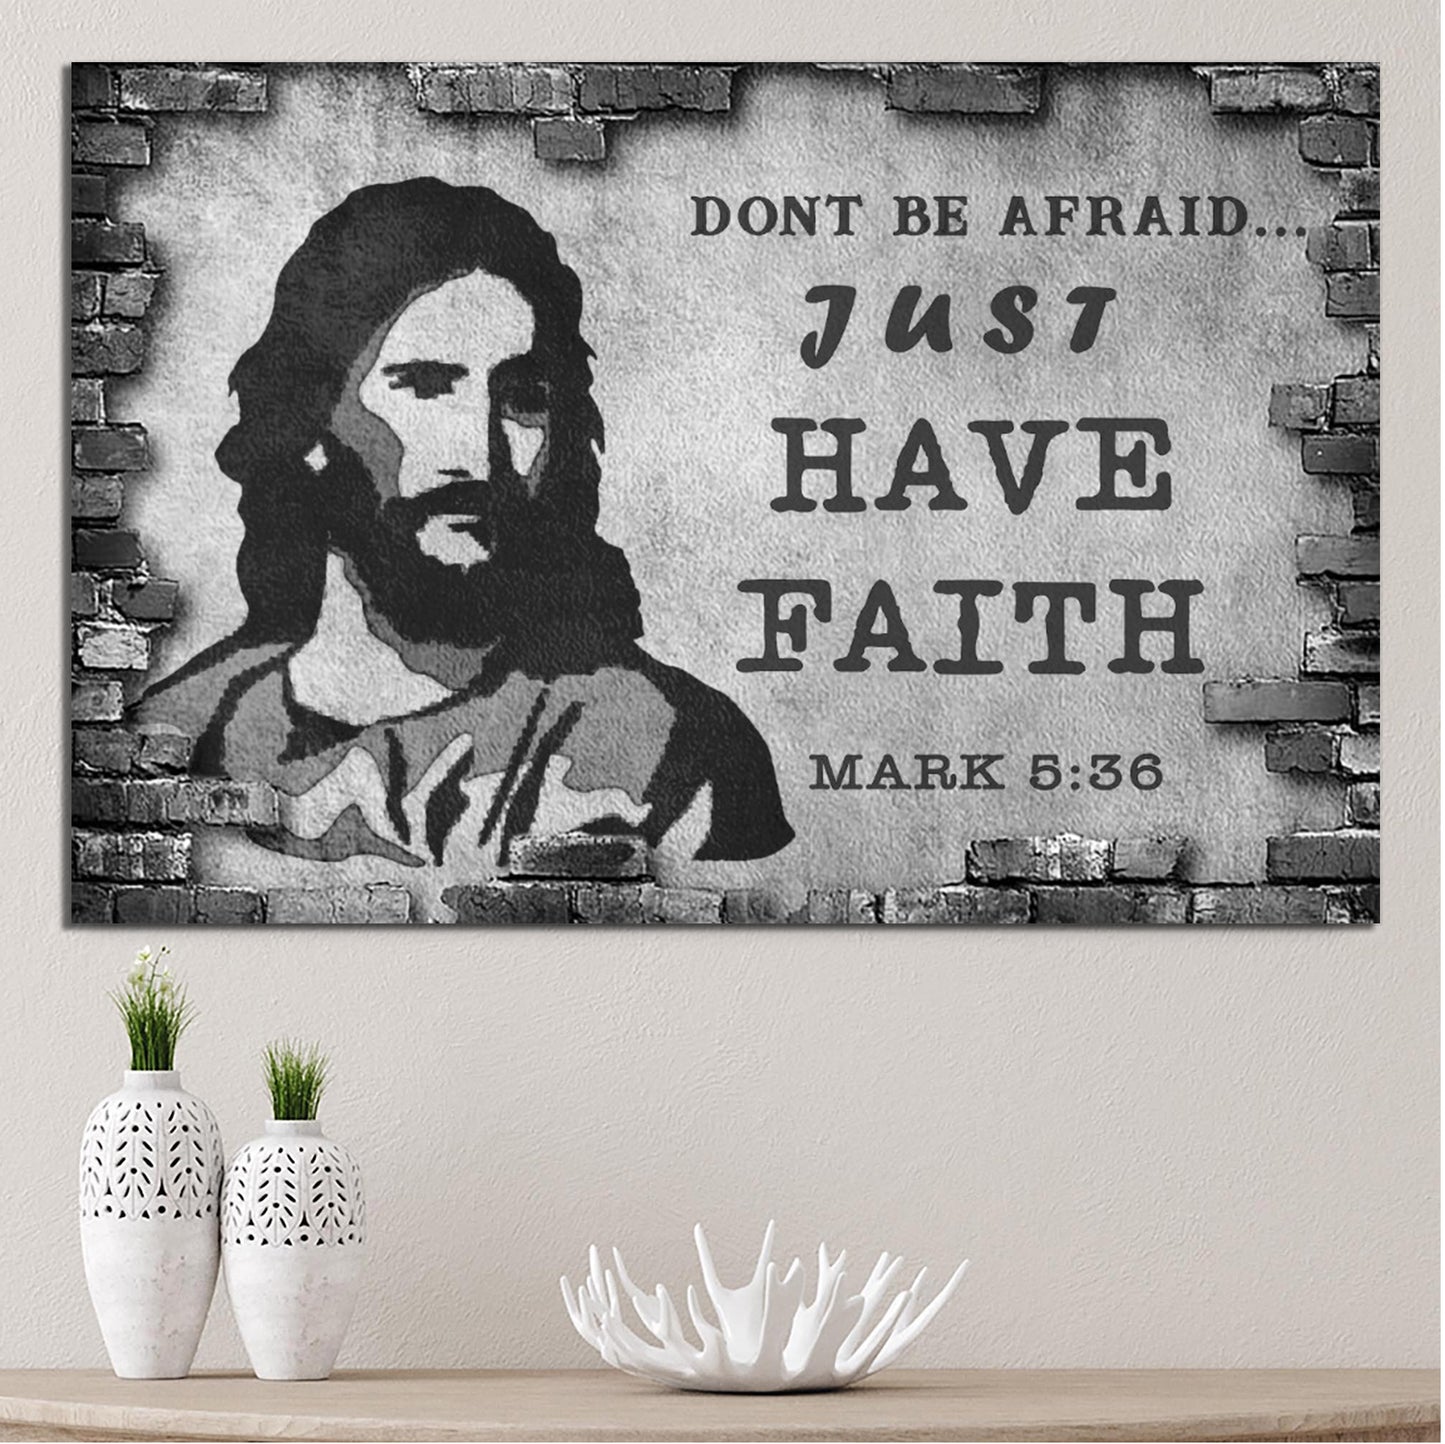 Mark 5:36 - Just Have Faith Sign - Image by Tailored Canvases